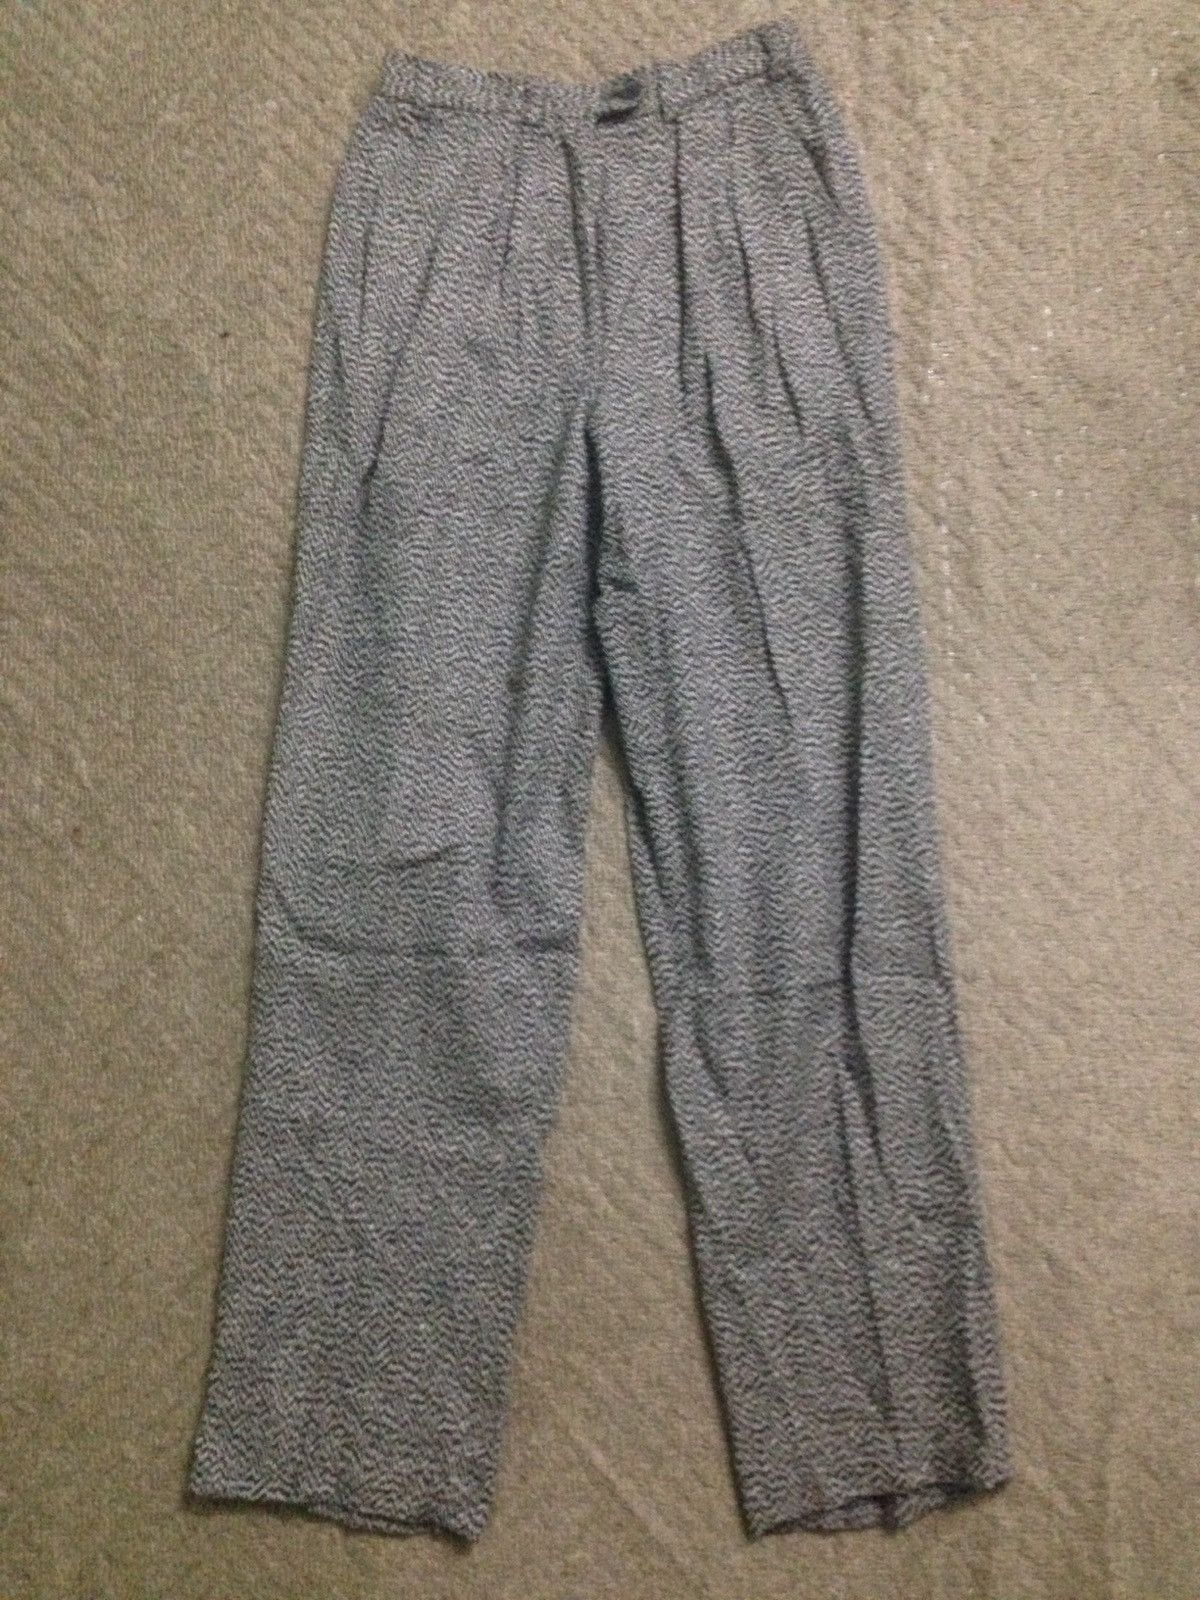 Vintage Giorgio Armani Wool Pants Made In Italy -R6 - 1